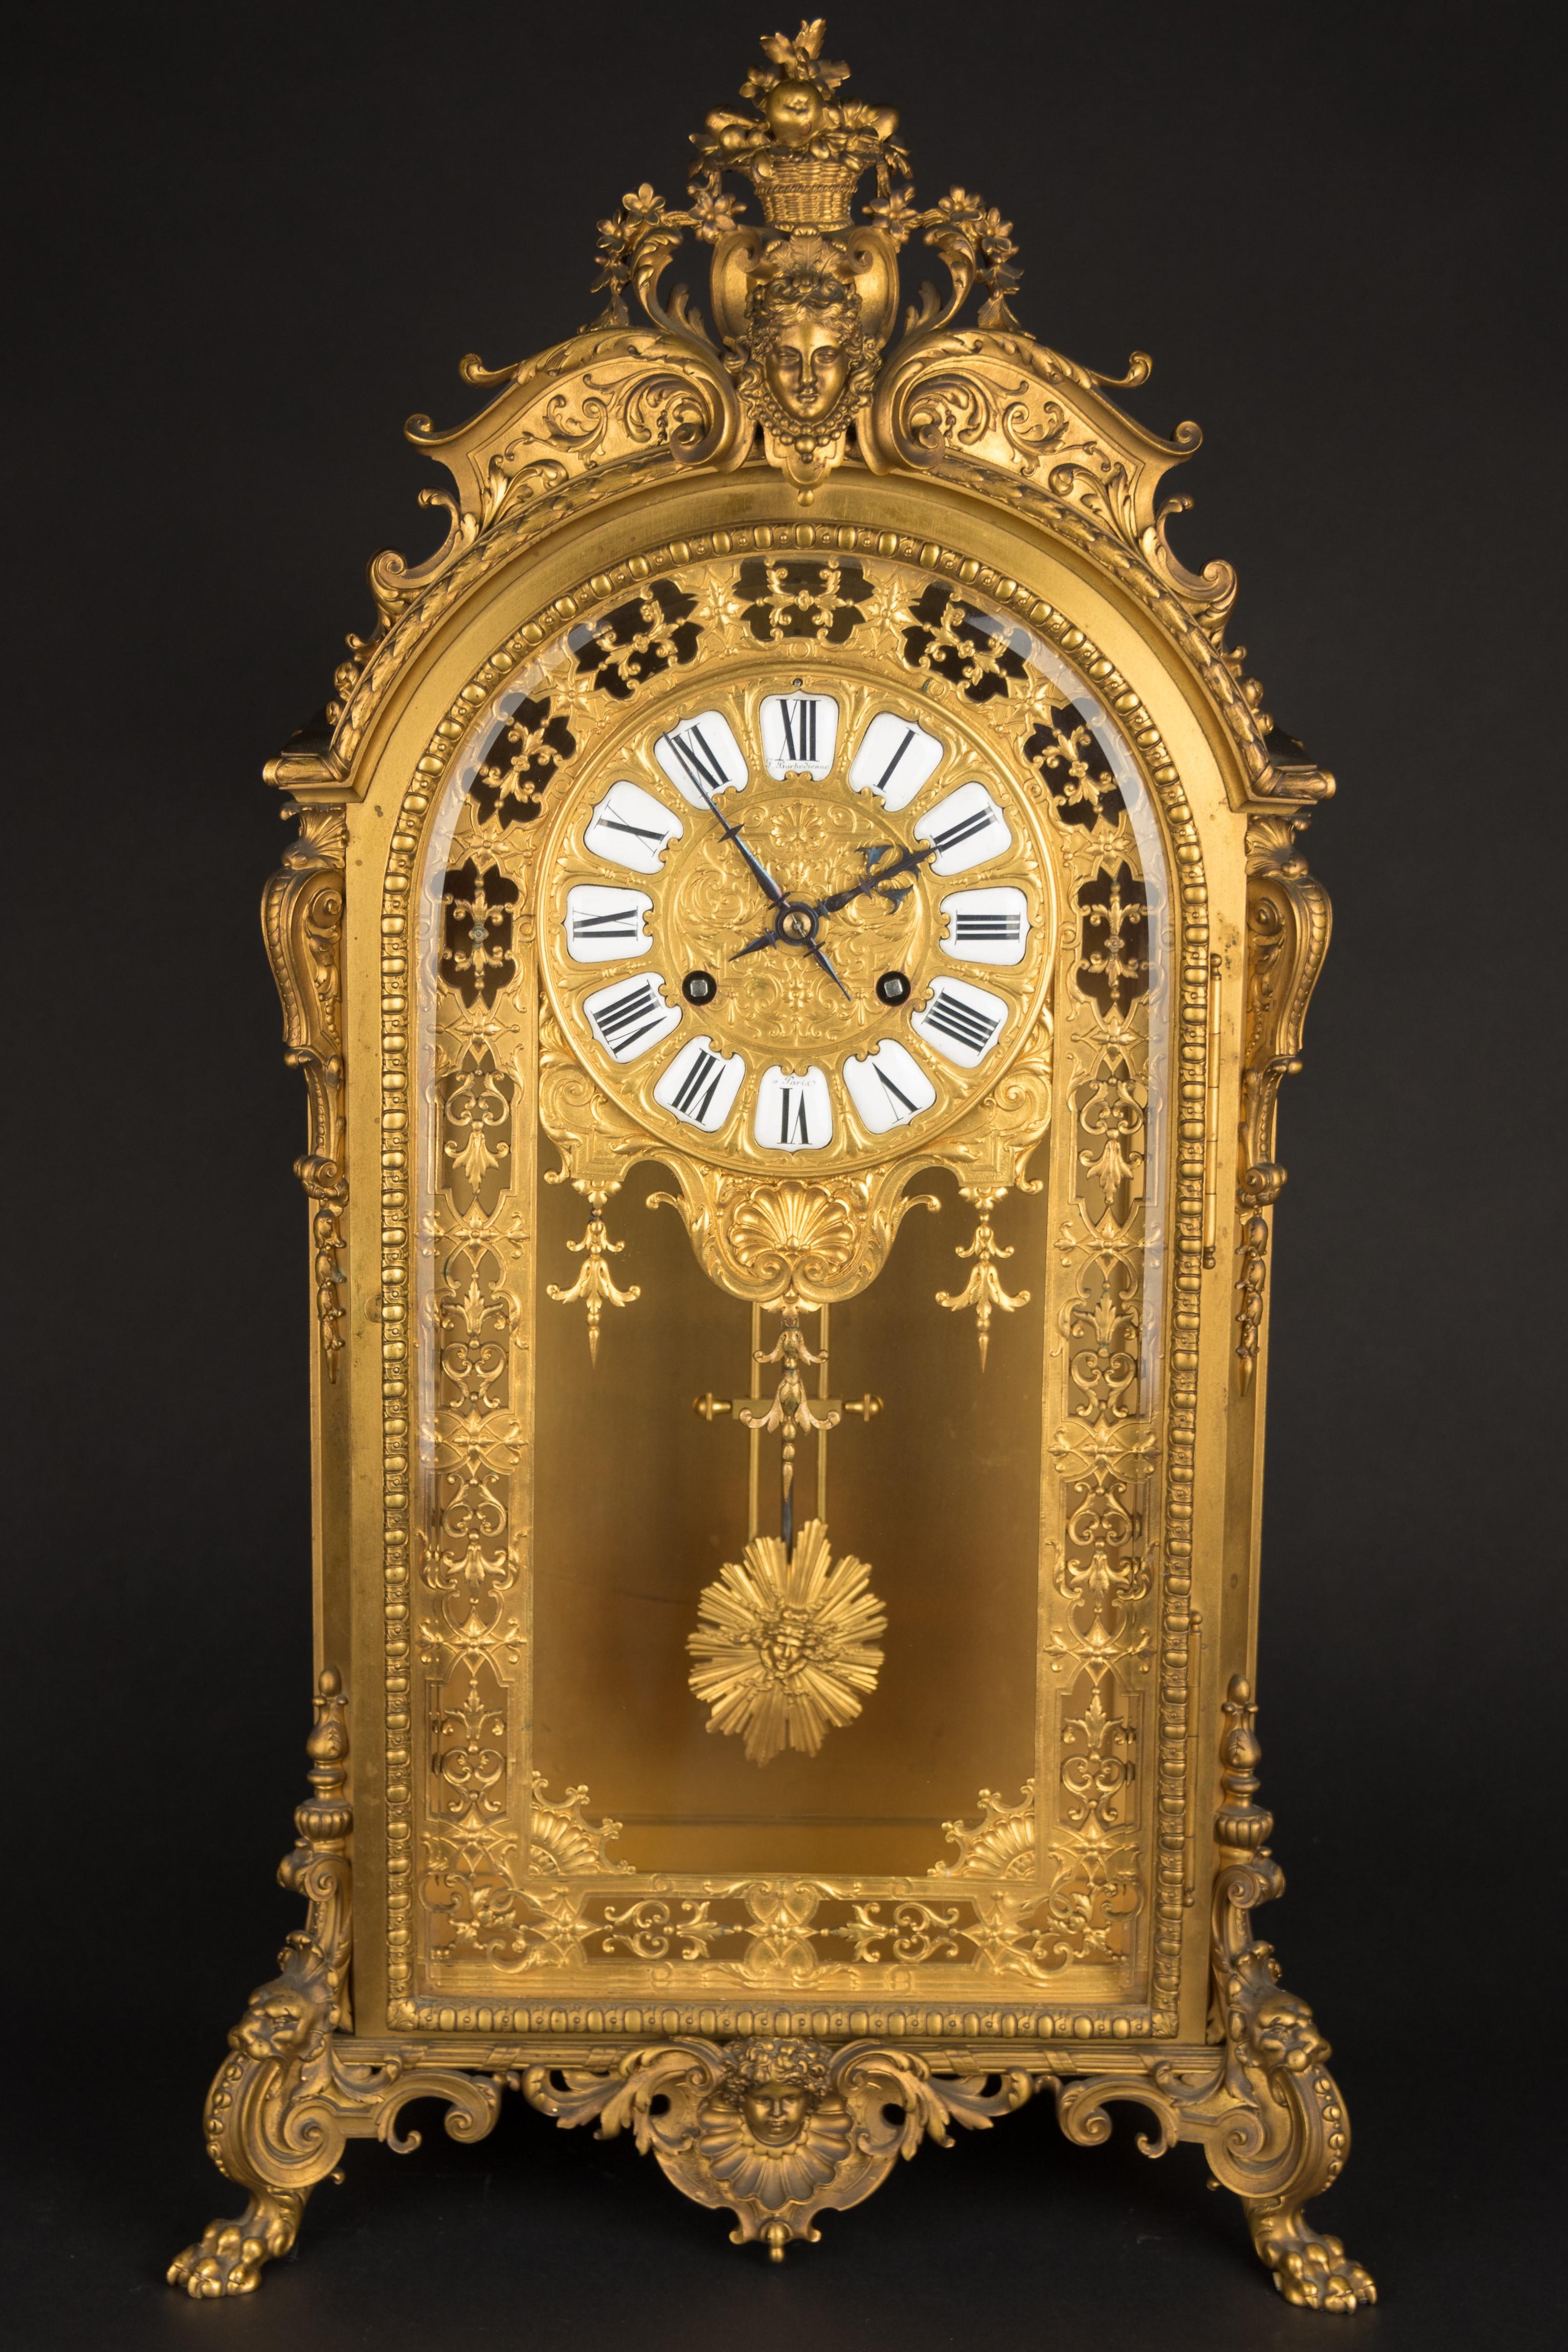 A fine quality Louis XV style French gilded ormolu clock, signed F.Barbedienne,
with white enamel roman numerals. Ferdinand Barbedienne was a French metalworker and manufacturer, who was well known as a bronze founder.